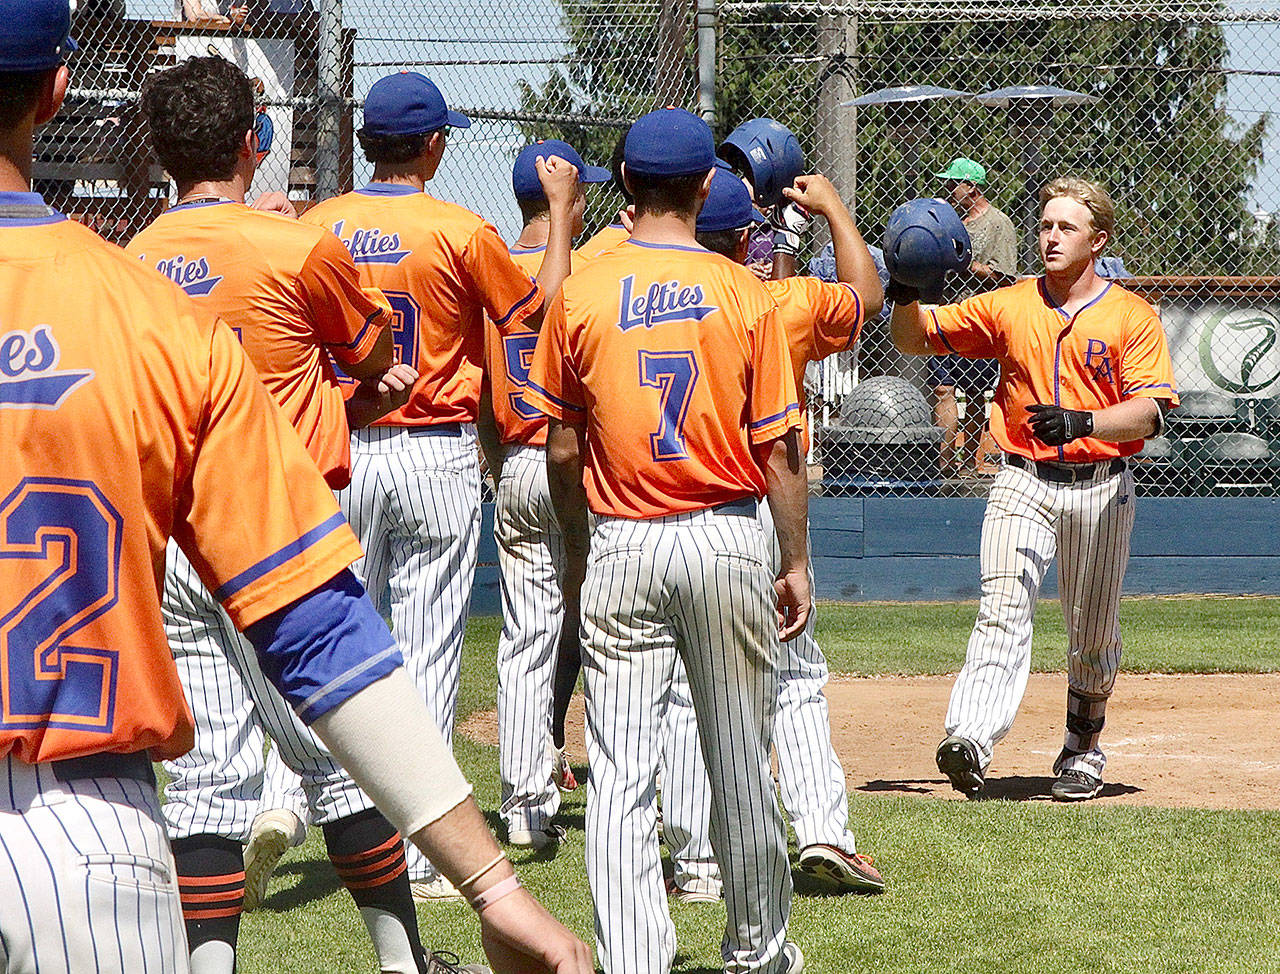 The Lefties’ Evan Hurn, at right, of Sequim, receives congratulations from his teammates after hitting a home run in Port Angeles’ 8-6 win Sunday over Kelowna at Civic Field. (Dave Logan/for Peninsula Daily News)